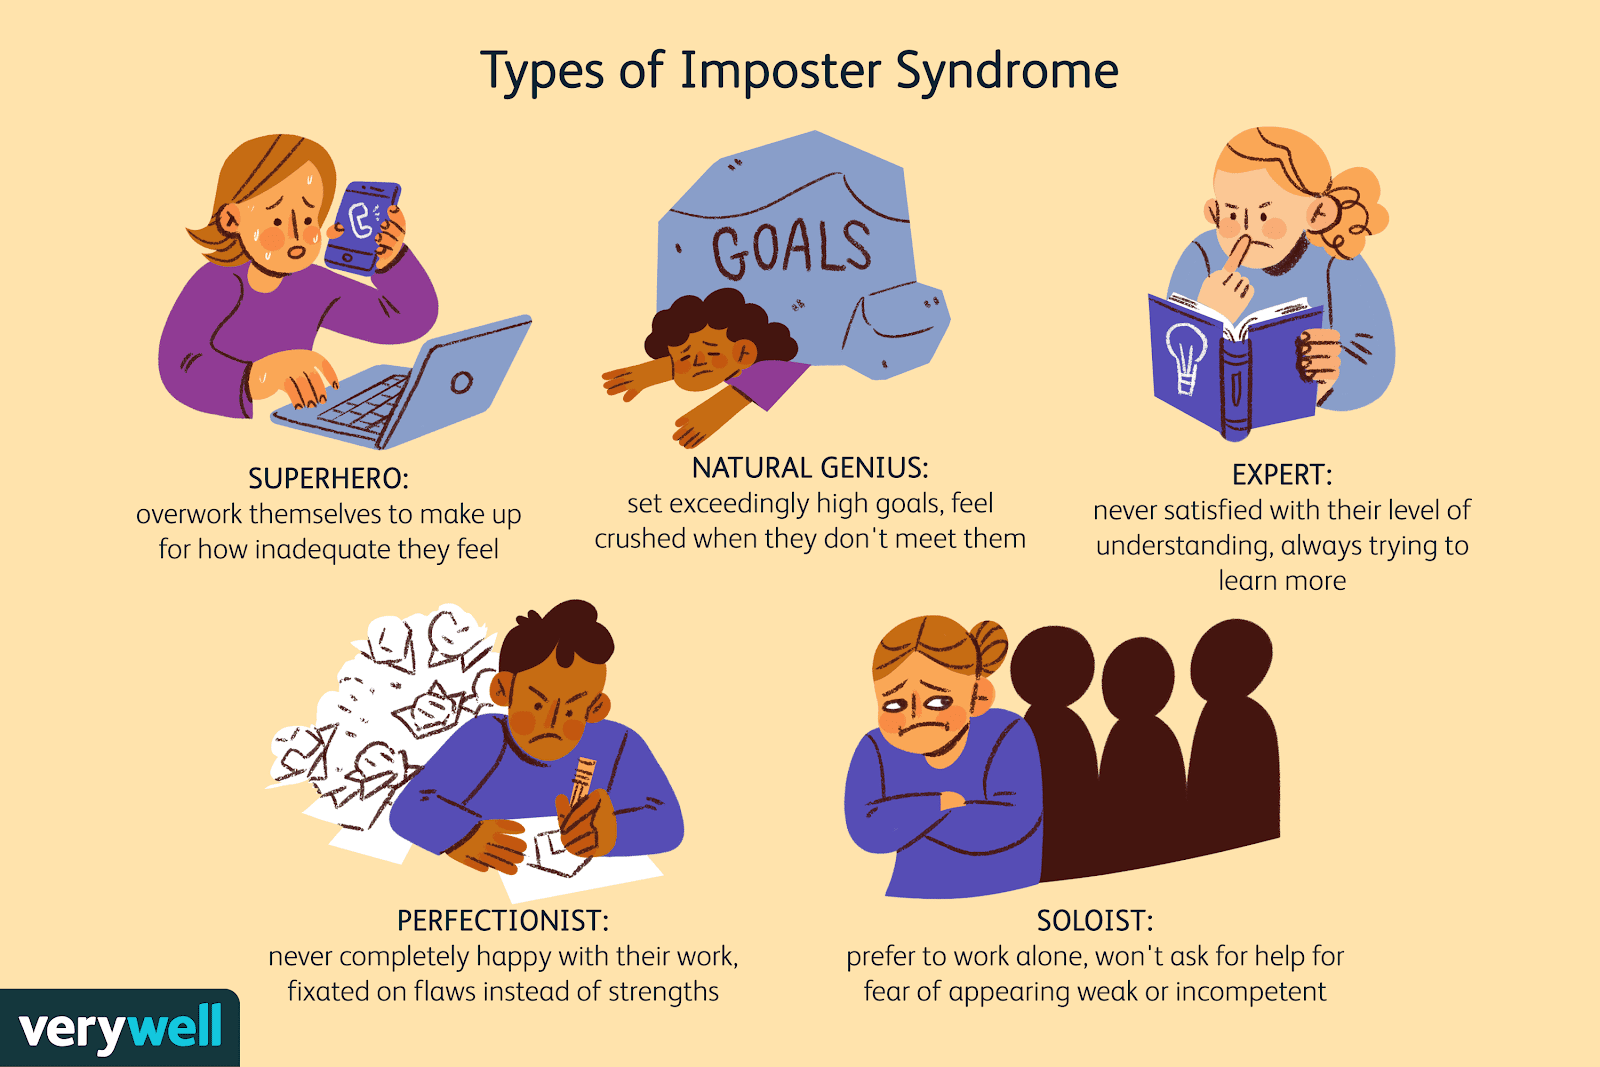 CredibleMind | What Is Imposter Syndrome?